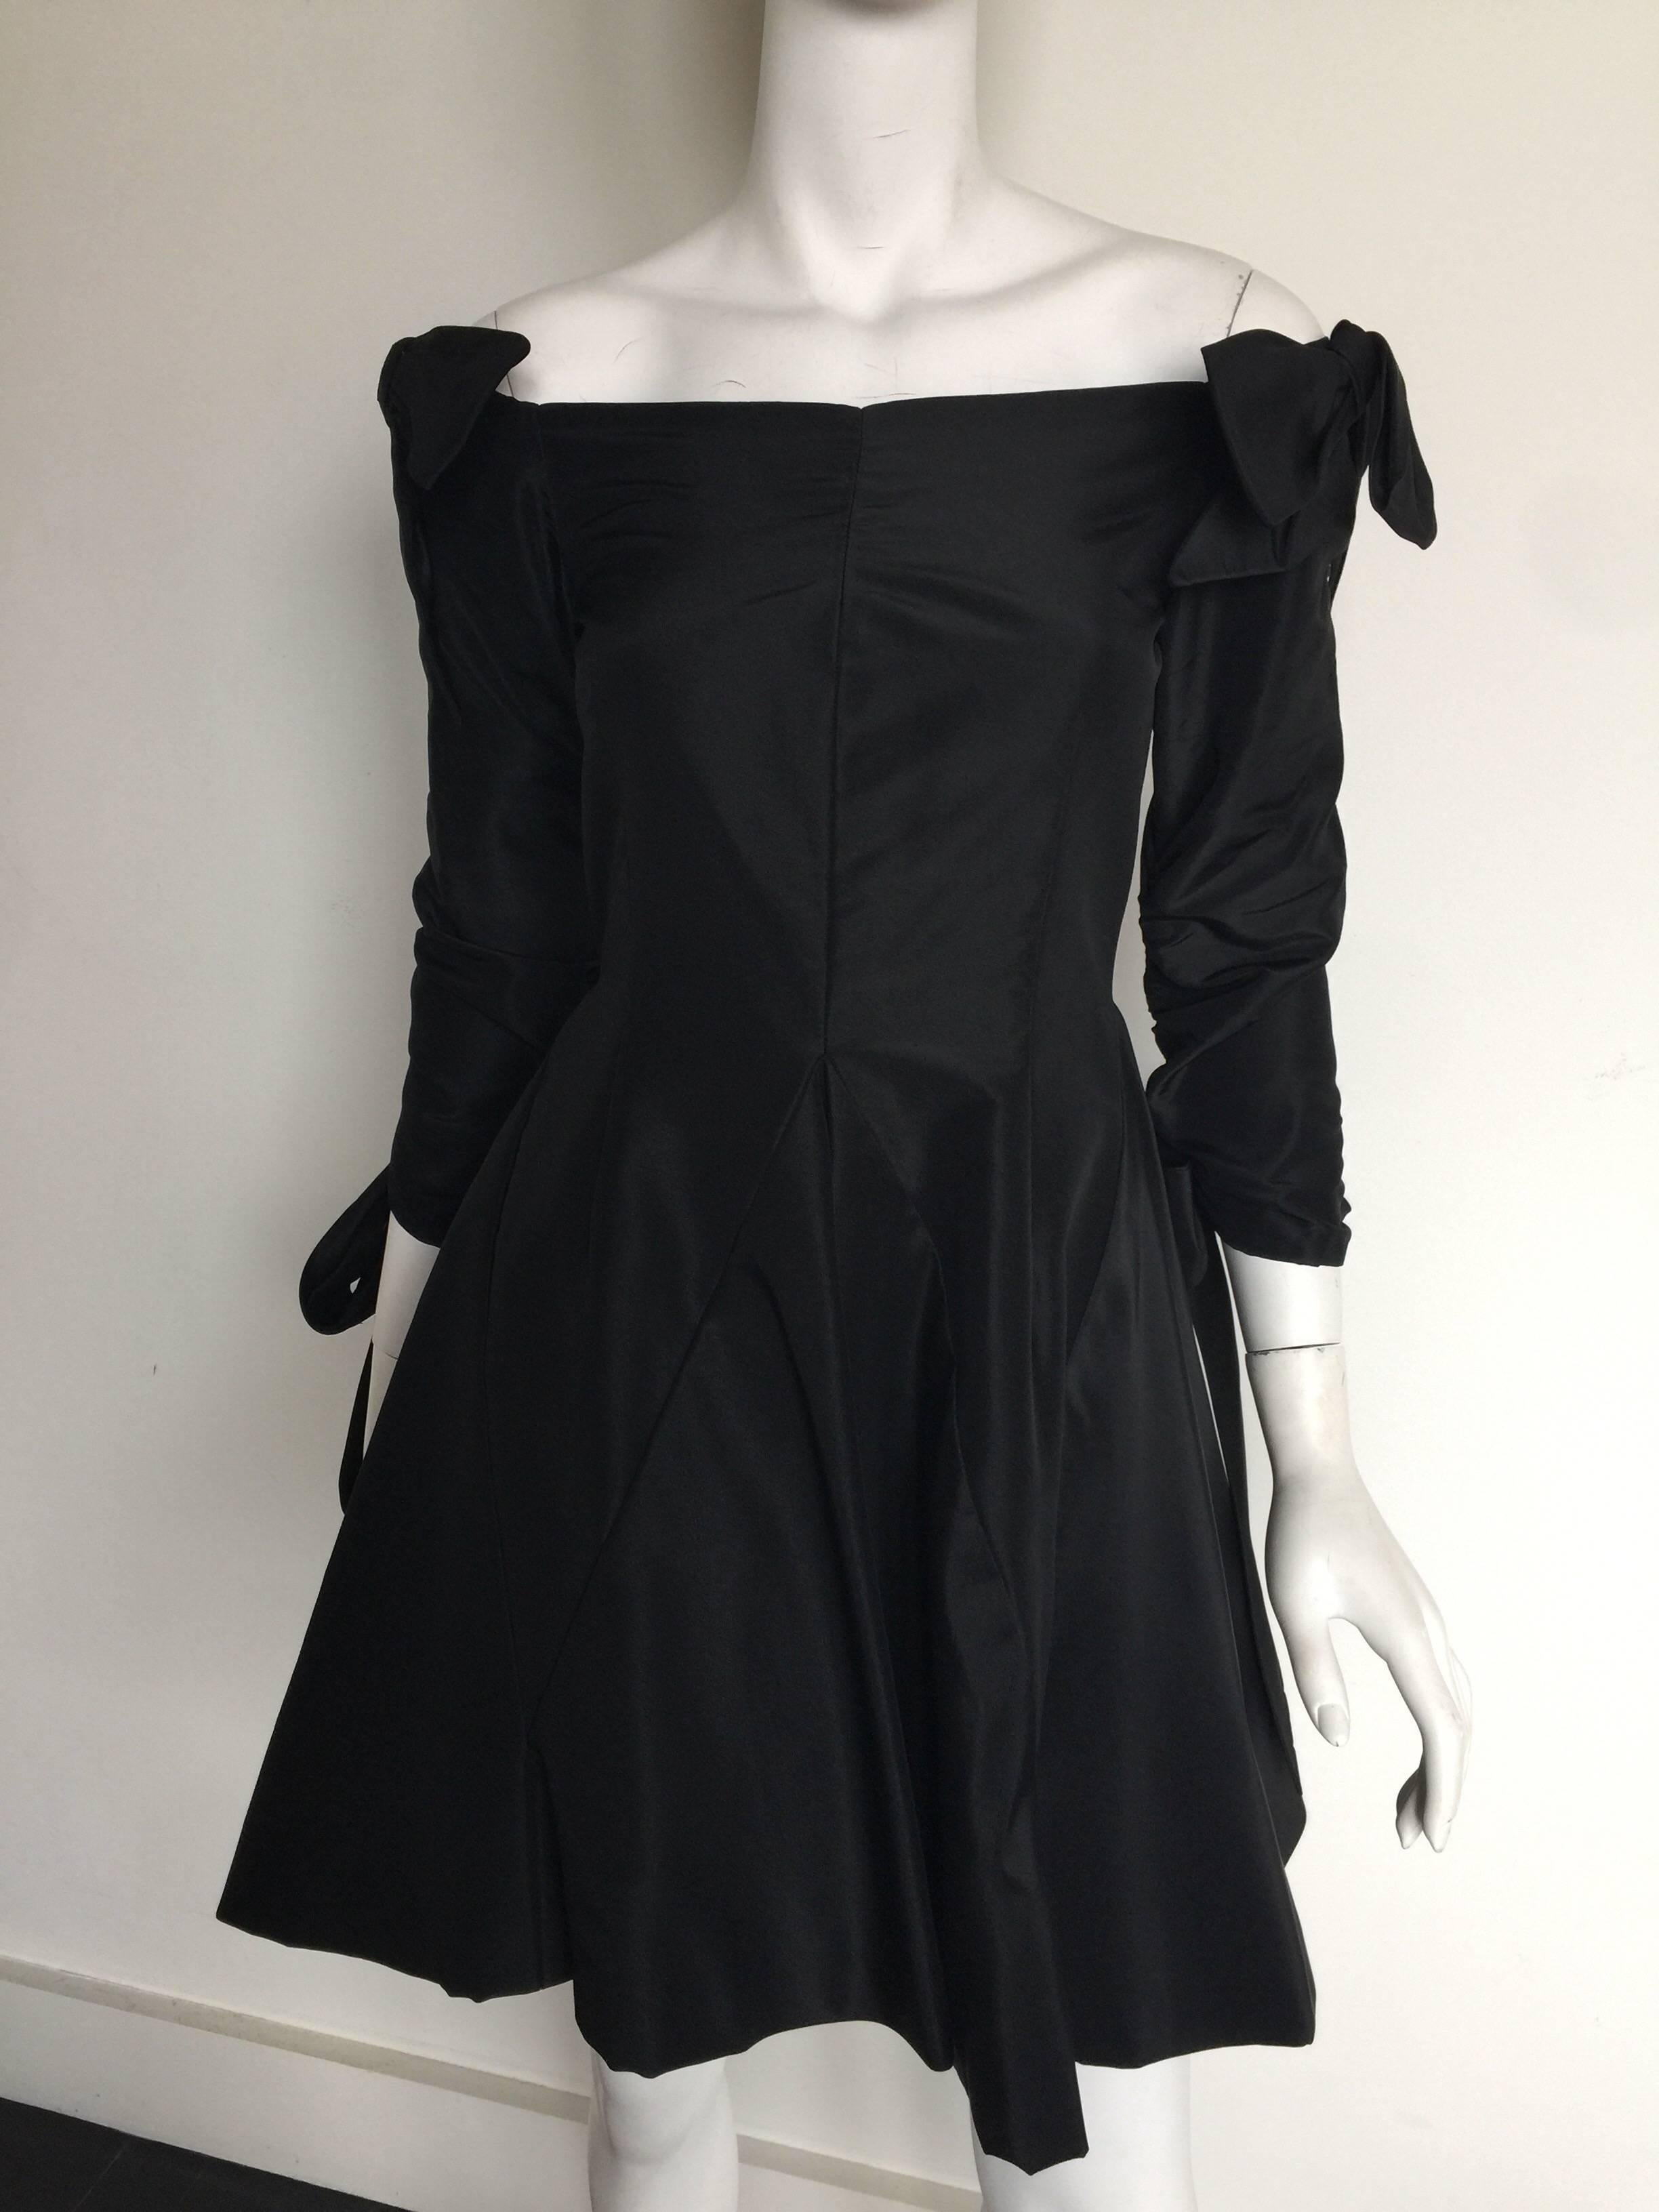 This iconic silk taffeta Bill Glass party dress is from the 1980s.  It has a tight waist and a short flare skirt with an off the shoulder bow detail.  